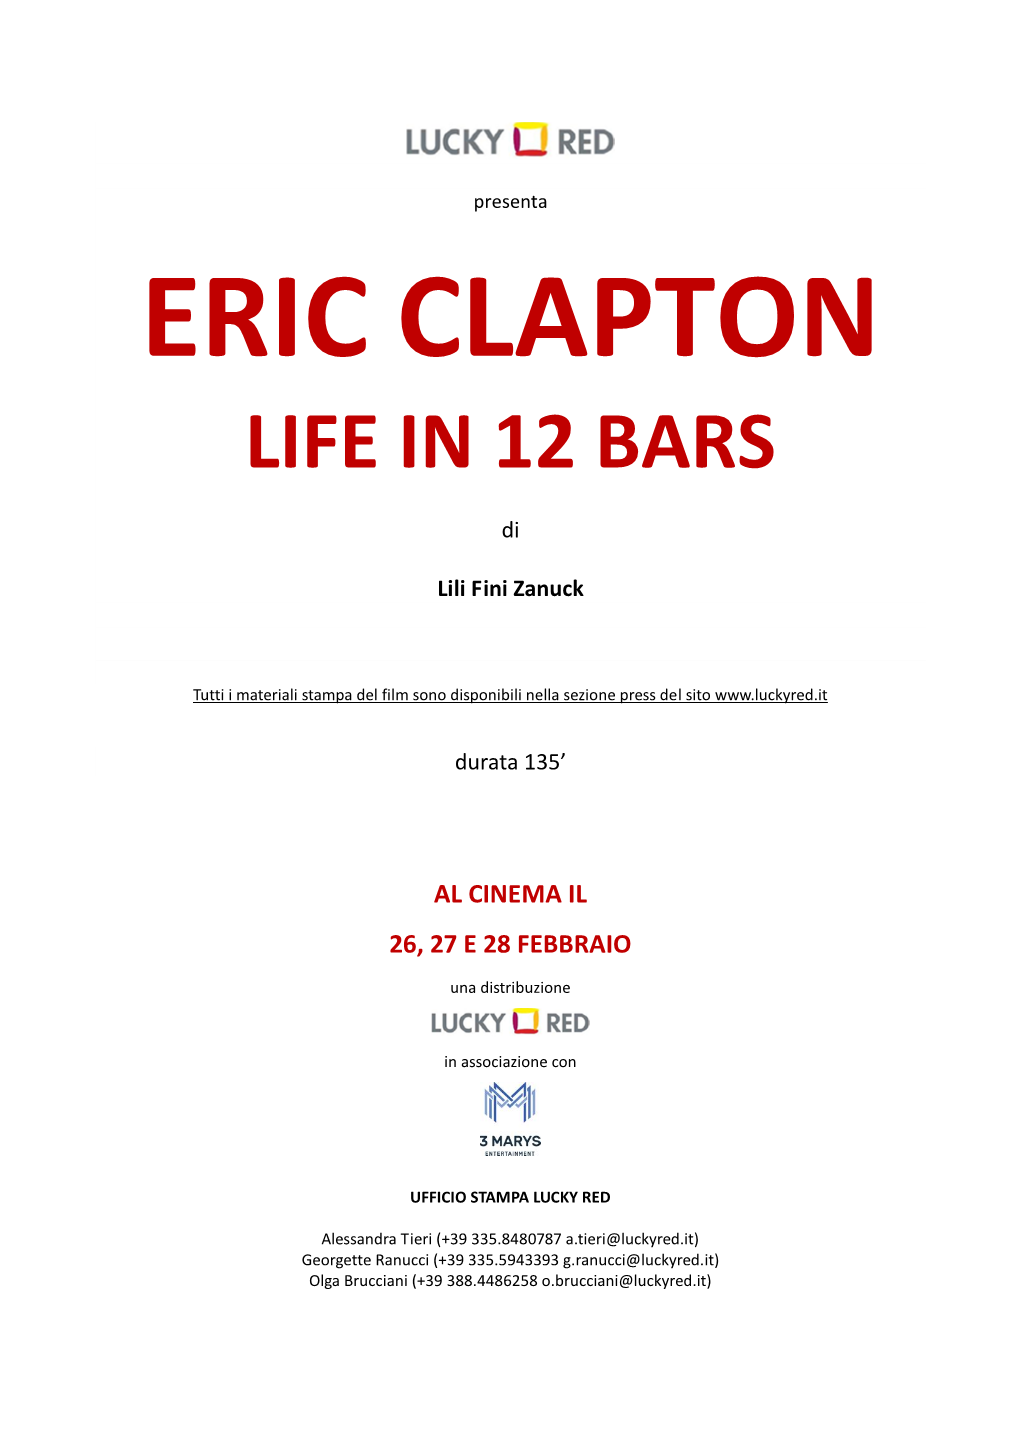 Eric Clapton Life in 12 Bars